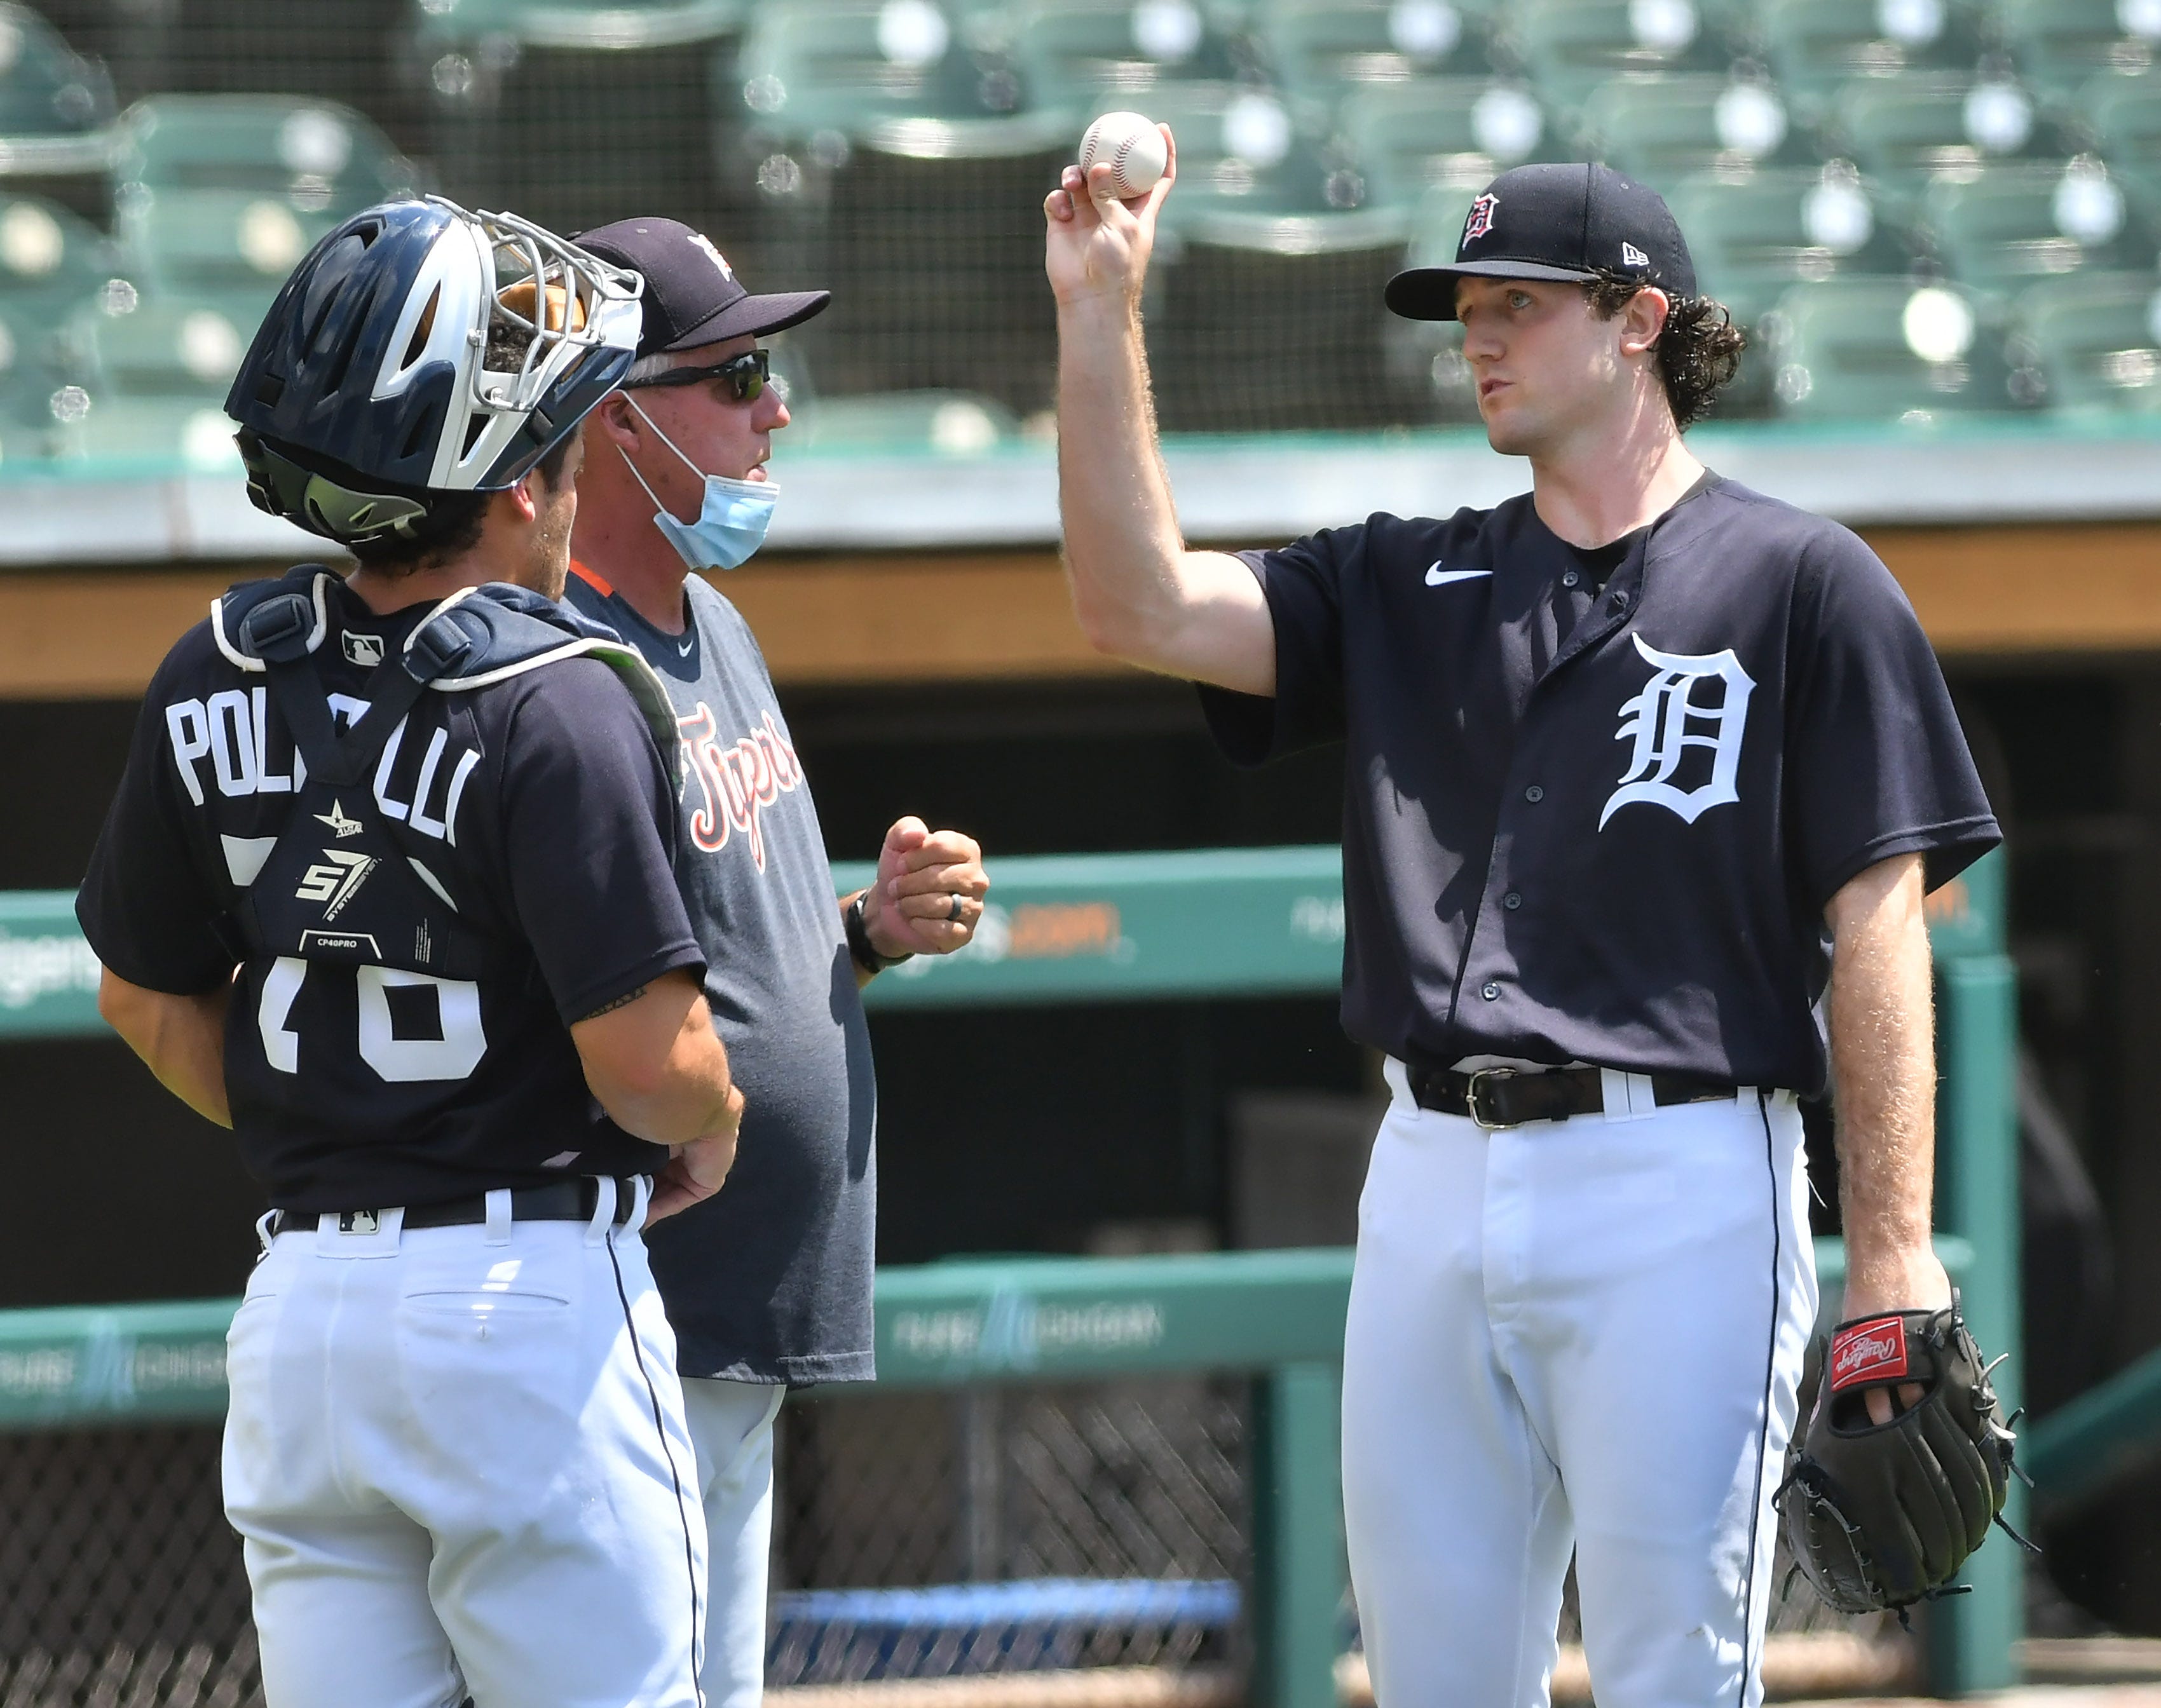 From left, Brady Policelli, Tigers pitching coach Rick Anderson and pitcher Casey Mize talk after Mize throws live batting practice.